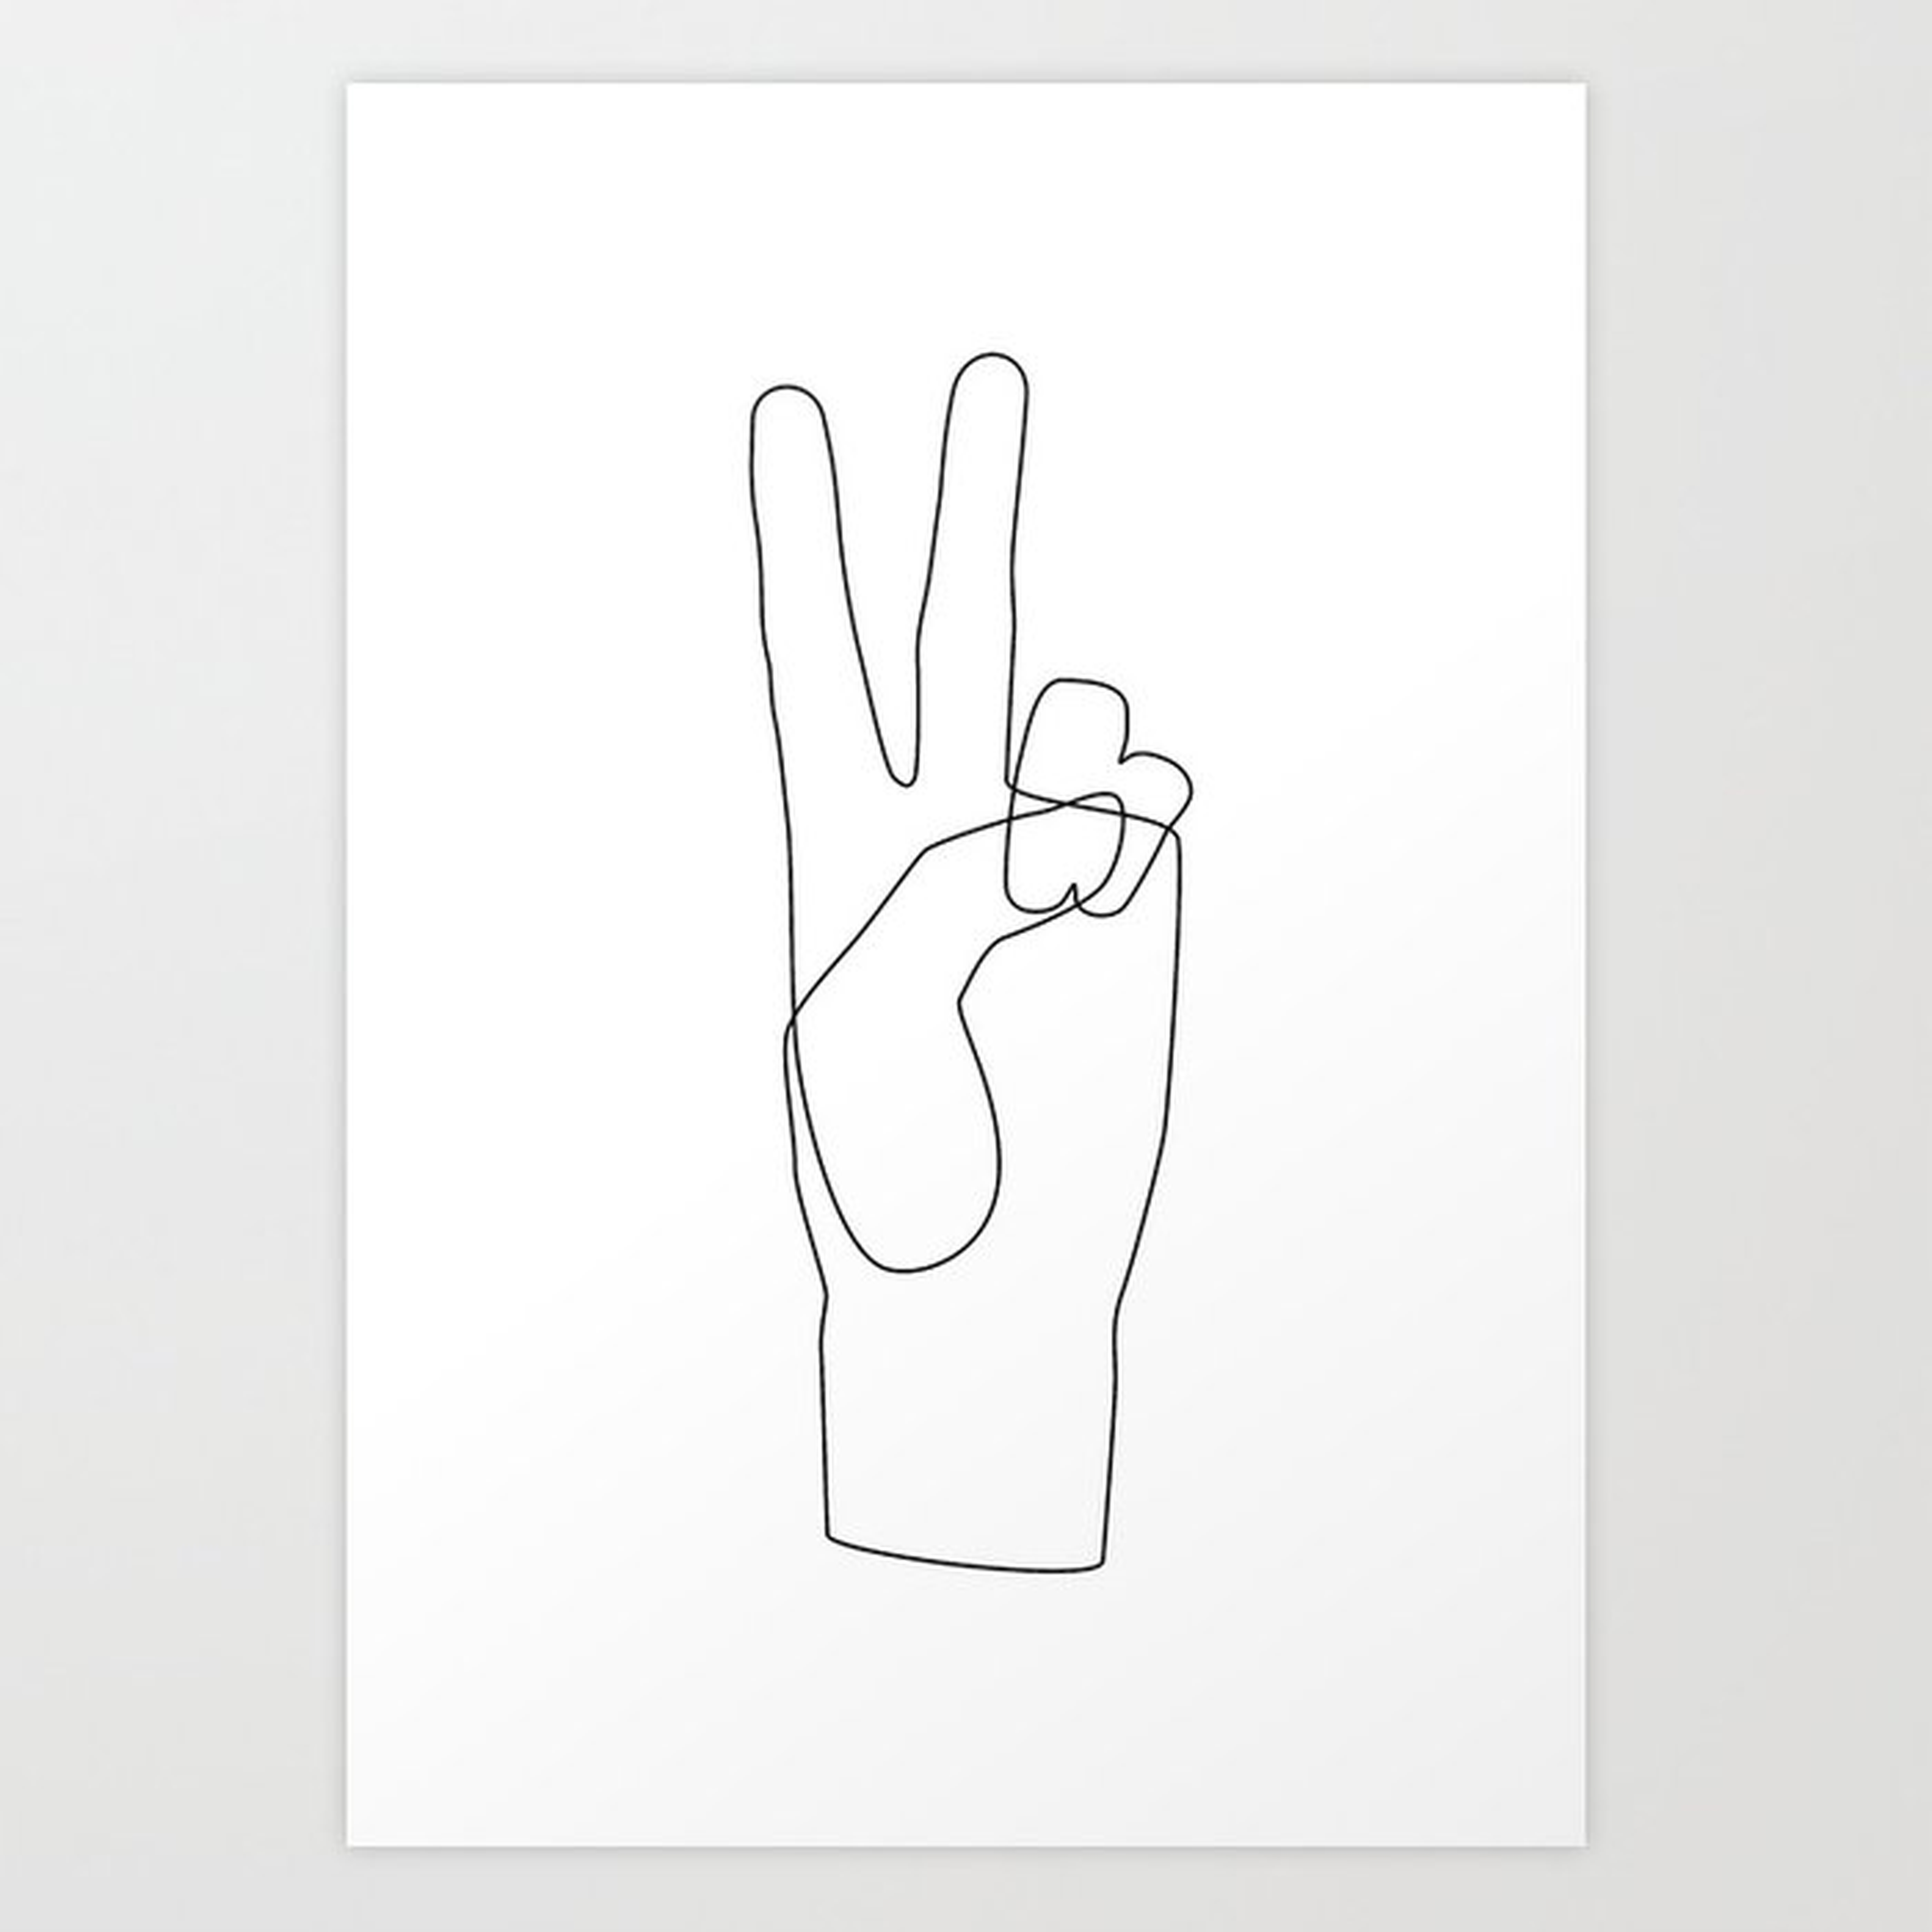 Peace Art Print by Explicit Design 7"x10" - Society6